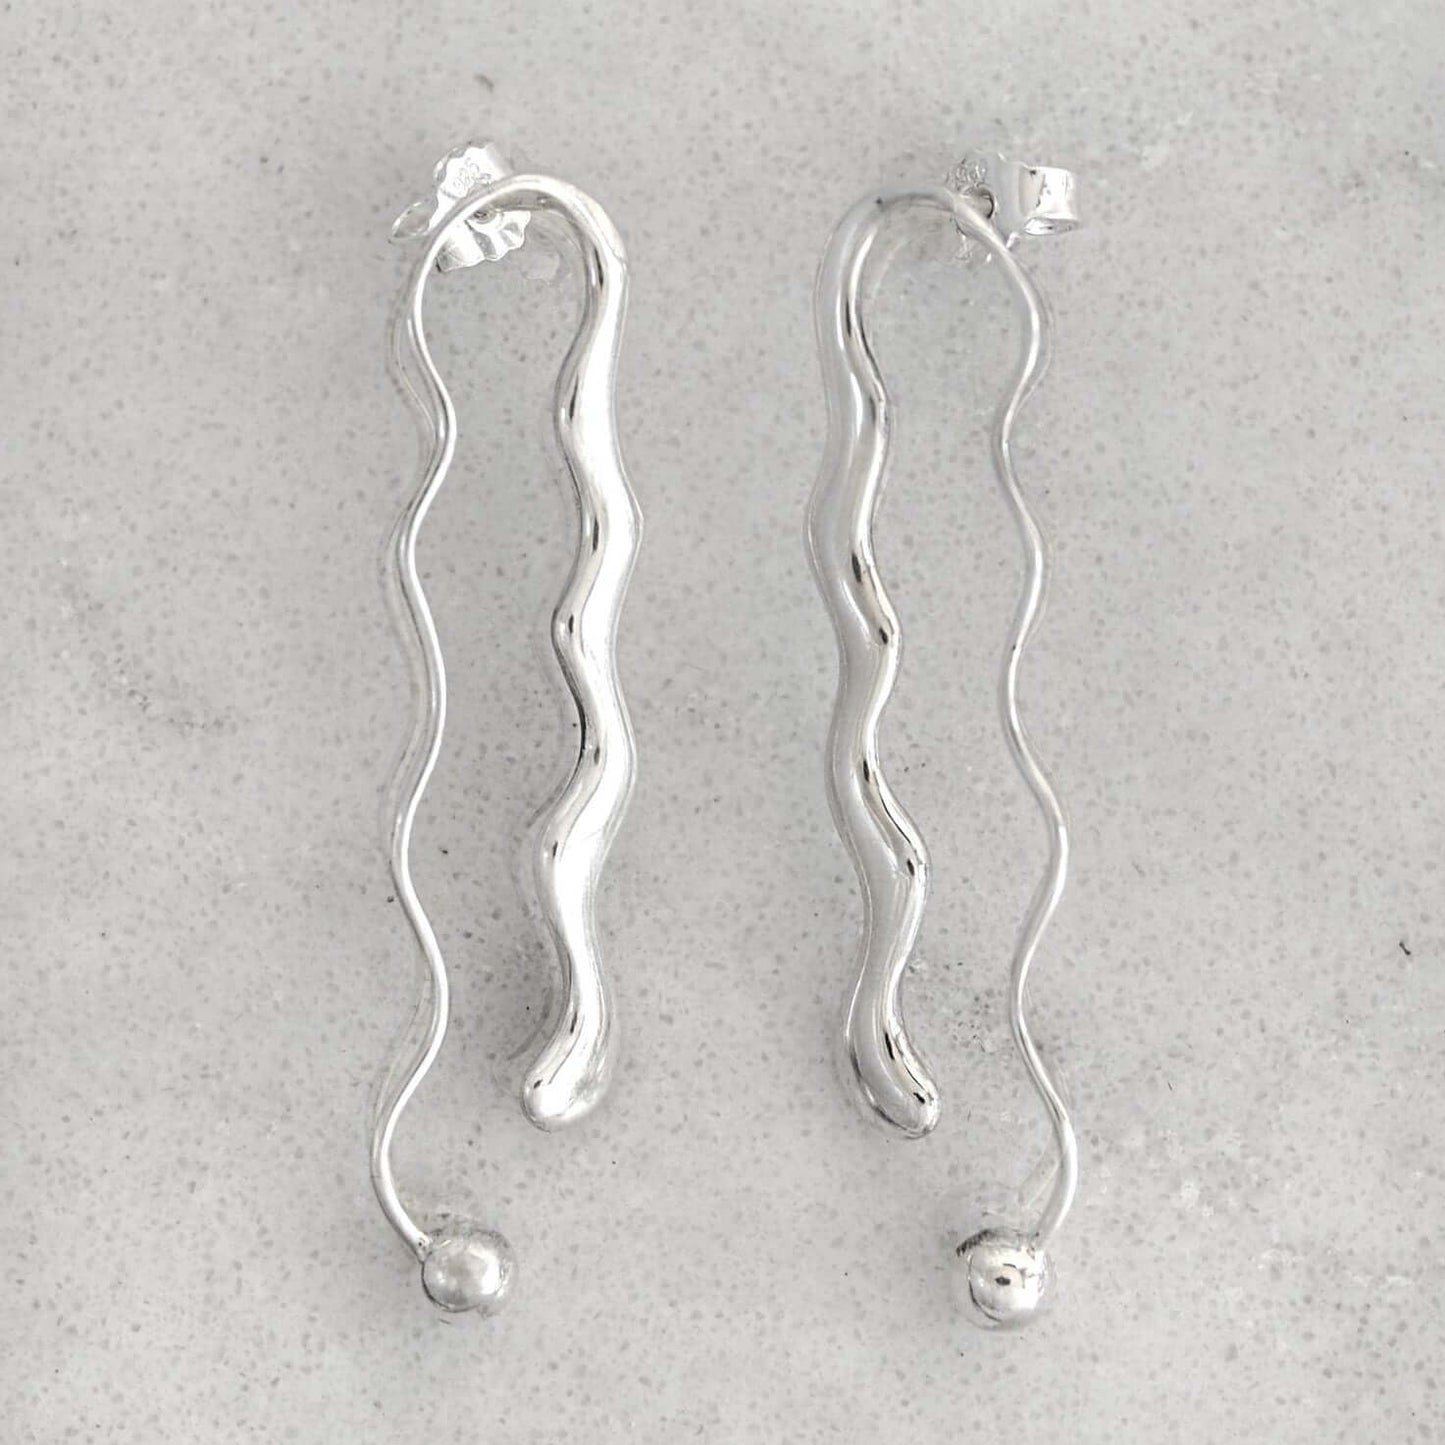 Product photo of a pair of silver earrings on a marble plate